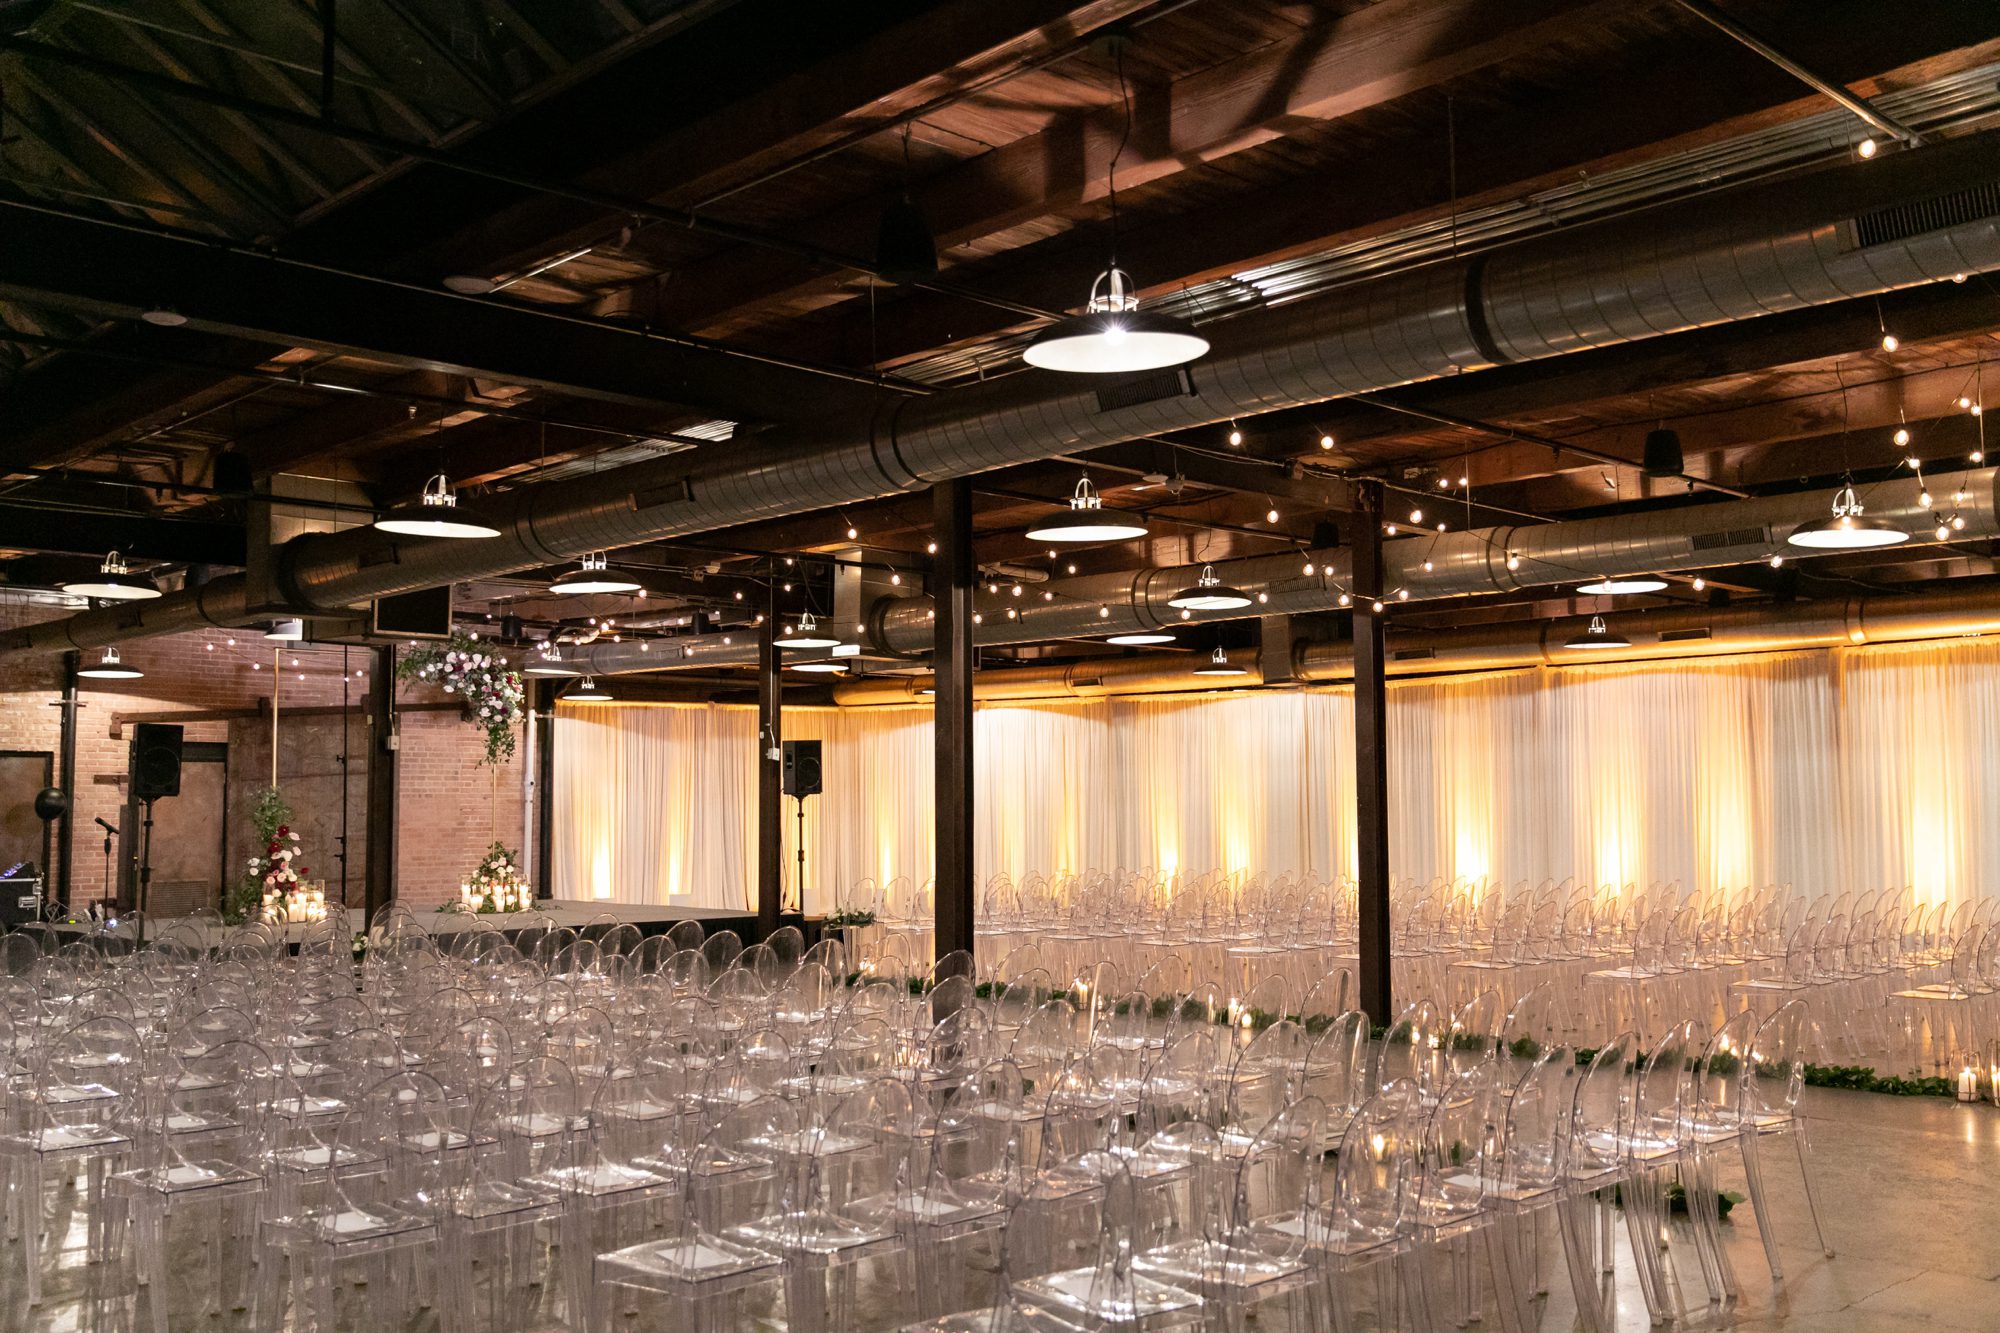 the couple was married in an industrial wedding venue